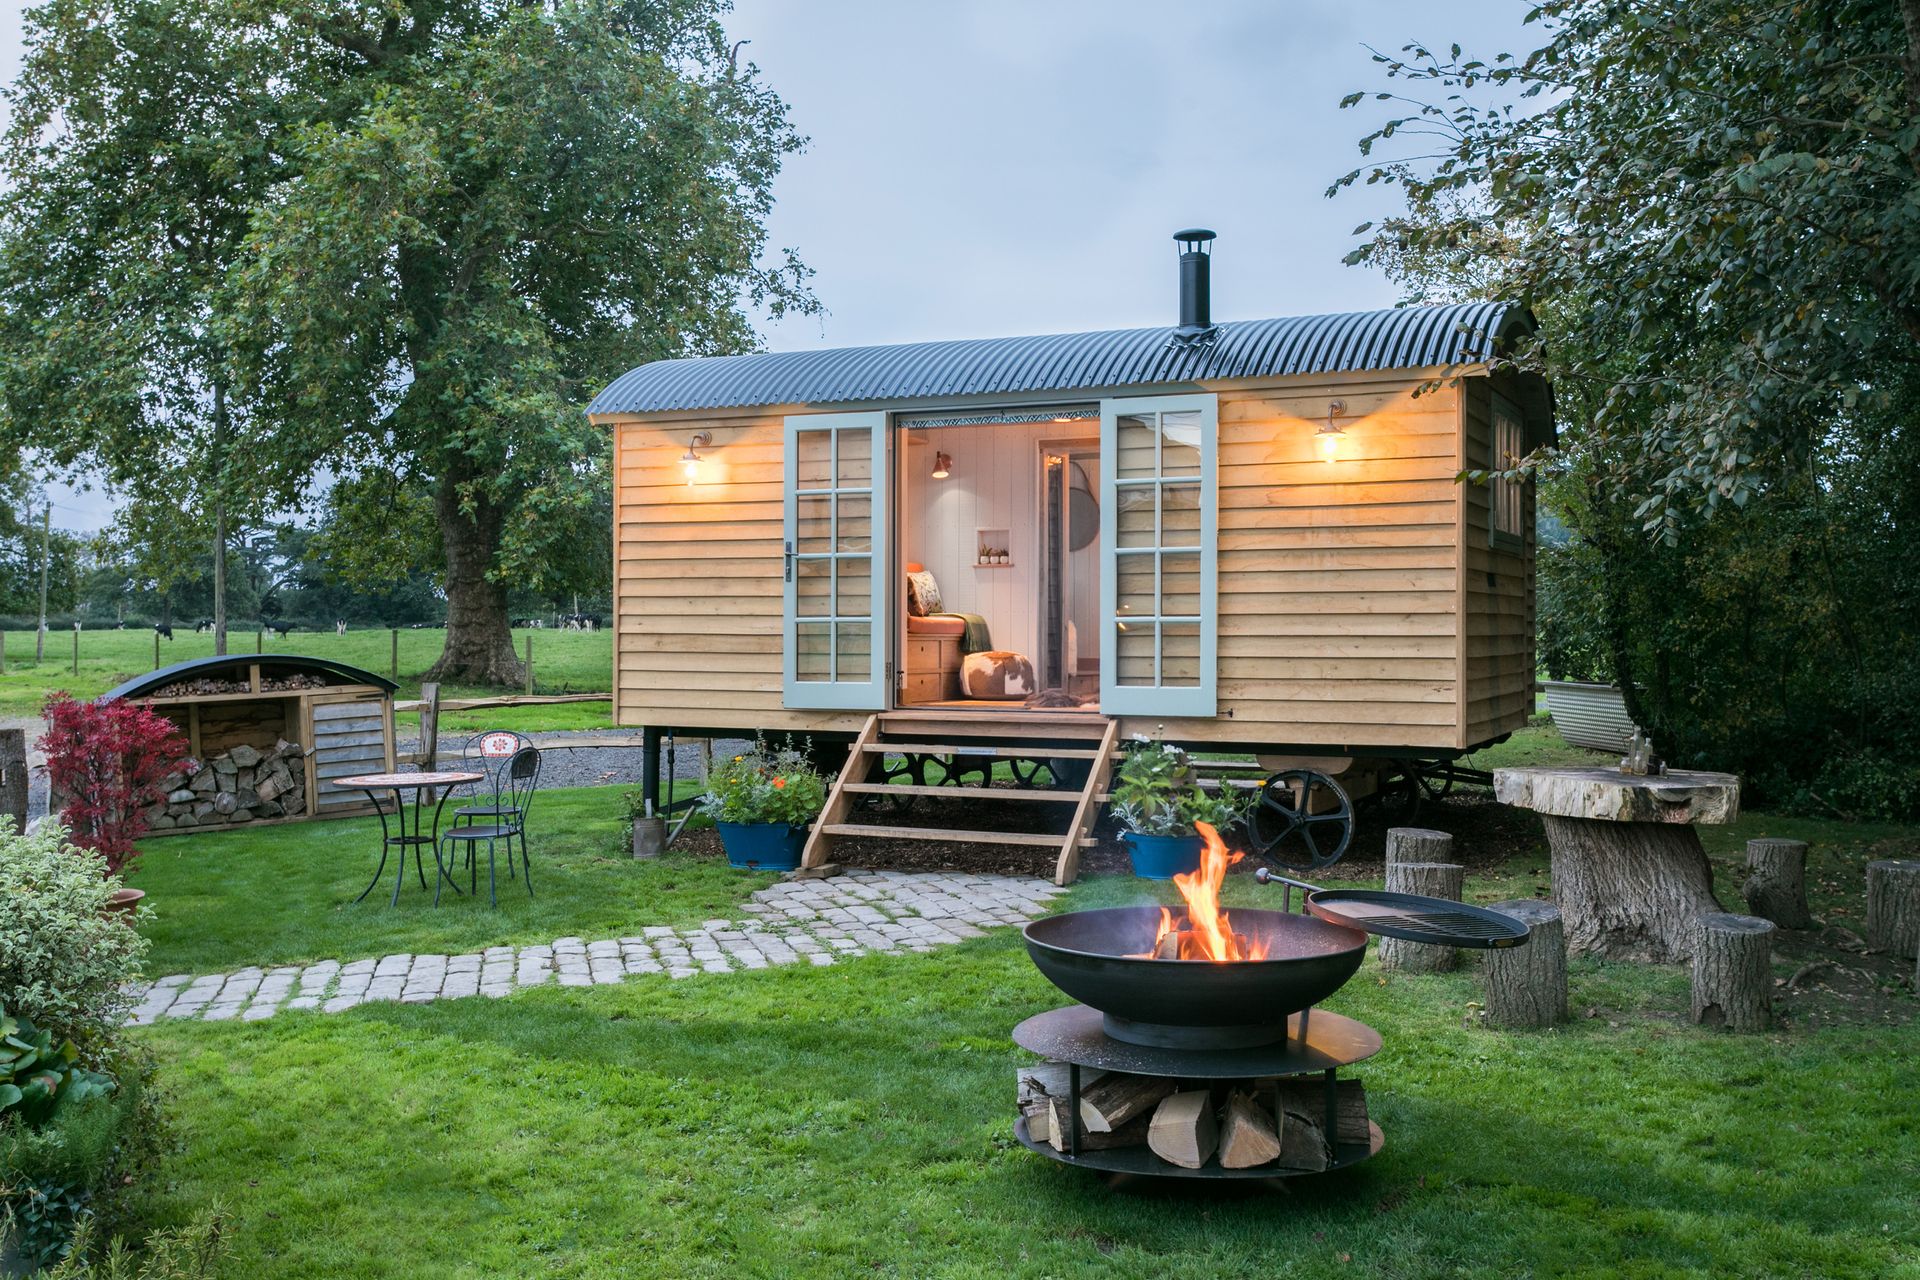 <p>                     Make the most of your space by including a secluded garden retreat in your large garden. A shepherd's hut nestled behind a hedge or at the far end of the garden, amongst trees, can make the perfect spot for reading, an extra bedroom or for your garden office.                   </p>                                      <p>                     Traditional in shape and neat in size, these raised huts ooze rural style and charm. Fit them out with a wood burning stove, simple kitchen units and kettle, and they can be comfortably used all year-round. Go for a design that's well insulated and can be mains powered and you'll be comfortable outdoors, whatever the weather. Set it up with its own seating area, a log store and some fun fire pit ideas and you’ll have a home-from-home right on the doorstep.                   </p>                                      <p>                     Love the idea but need a more budget-friendly option? Don't discount your existing garden buildings as with some clever shed ideas, even your humble garden shed can become a tranquil outdoor hideaway.                   </p>